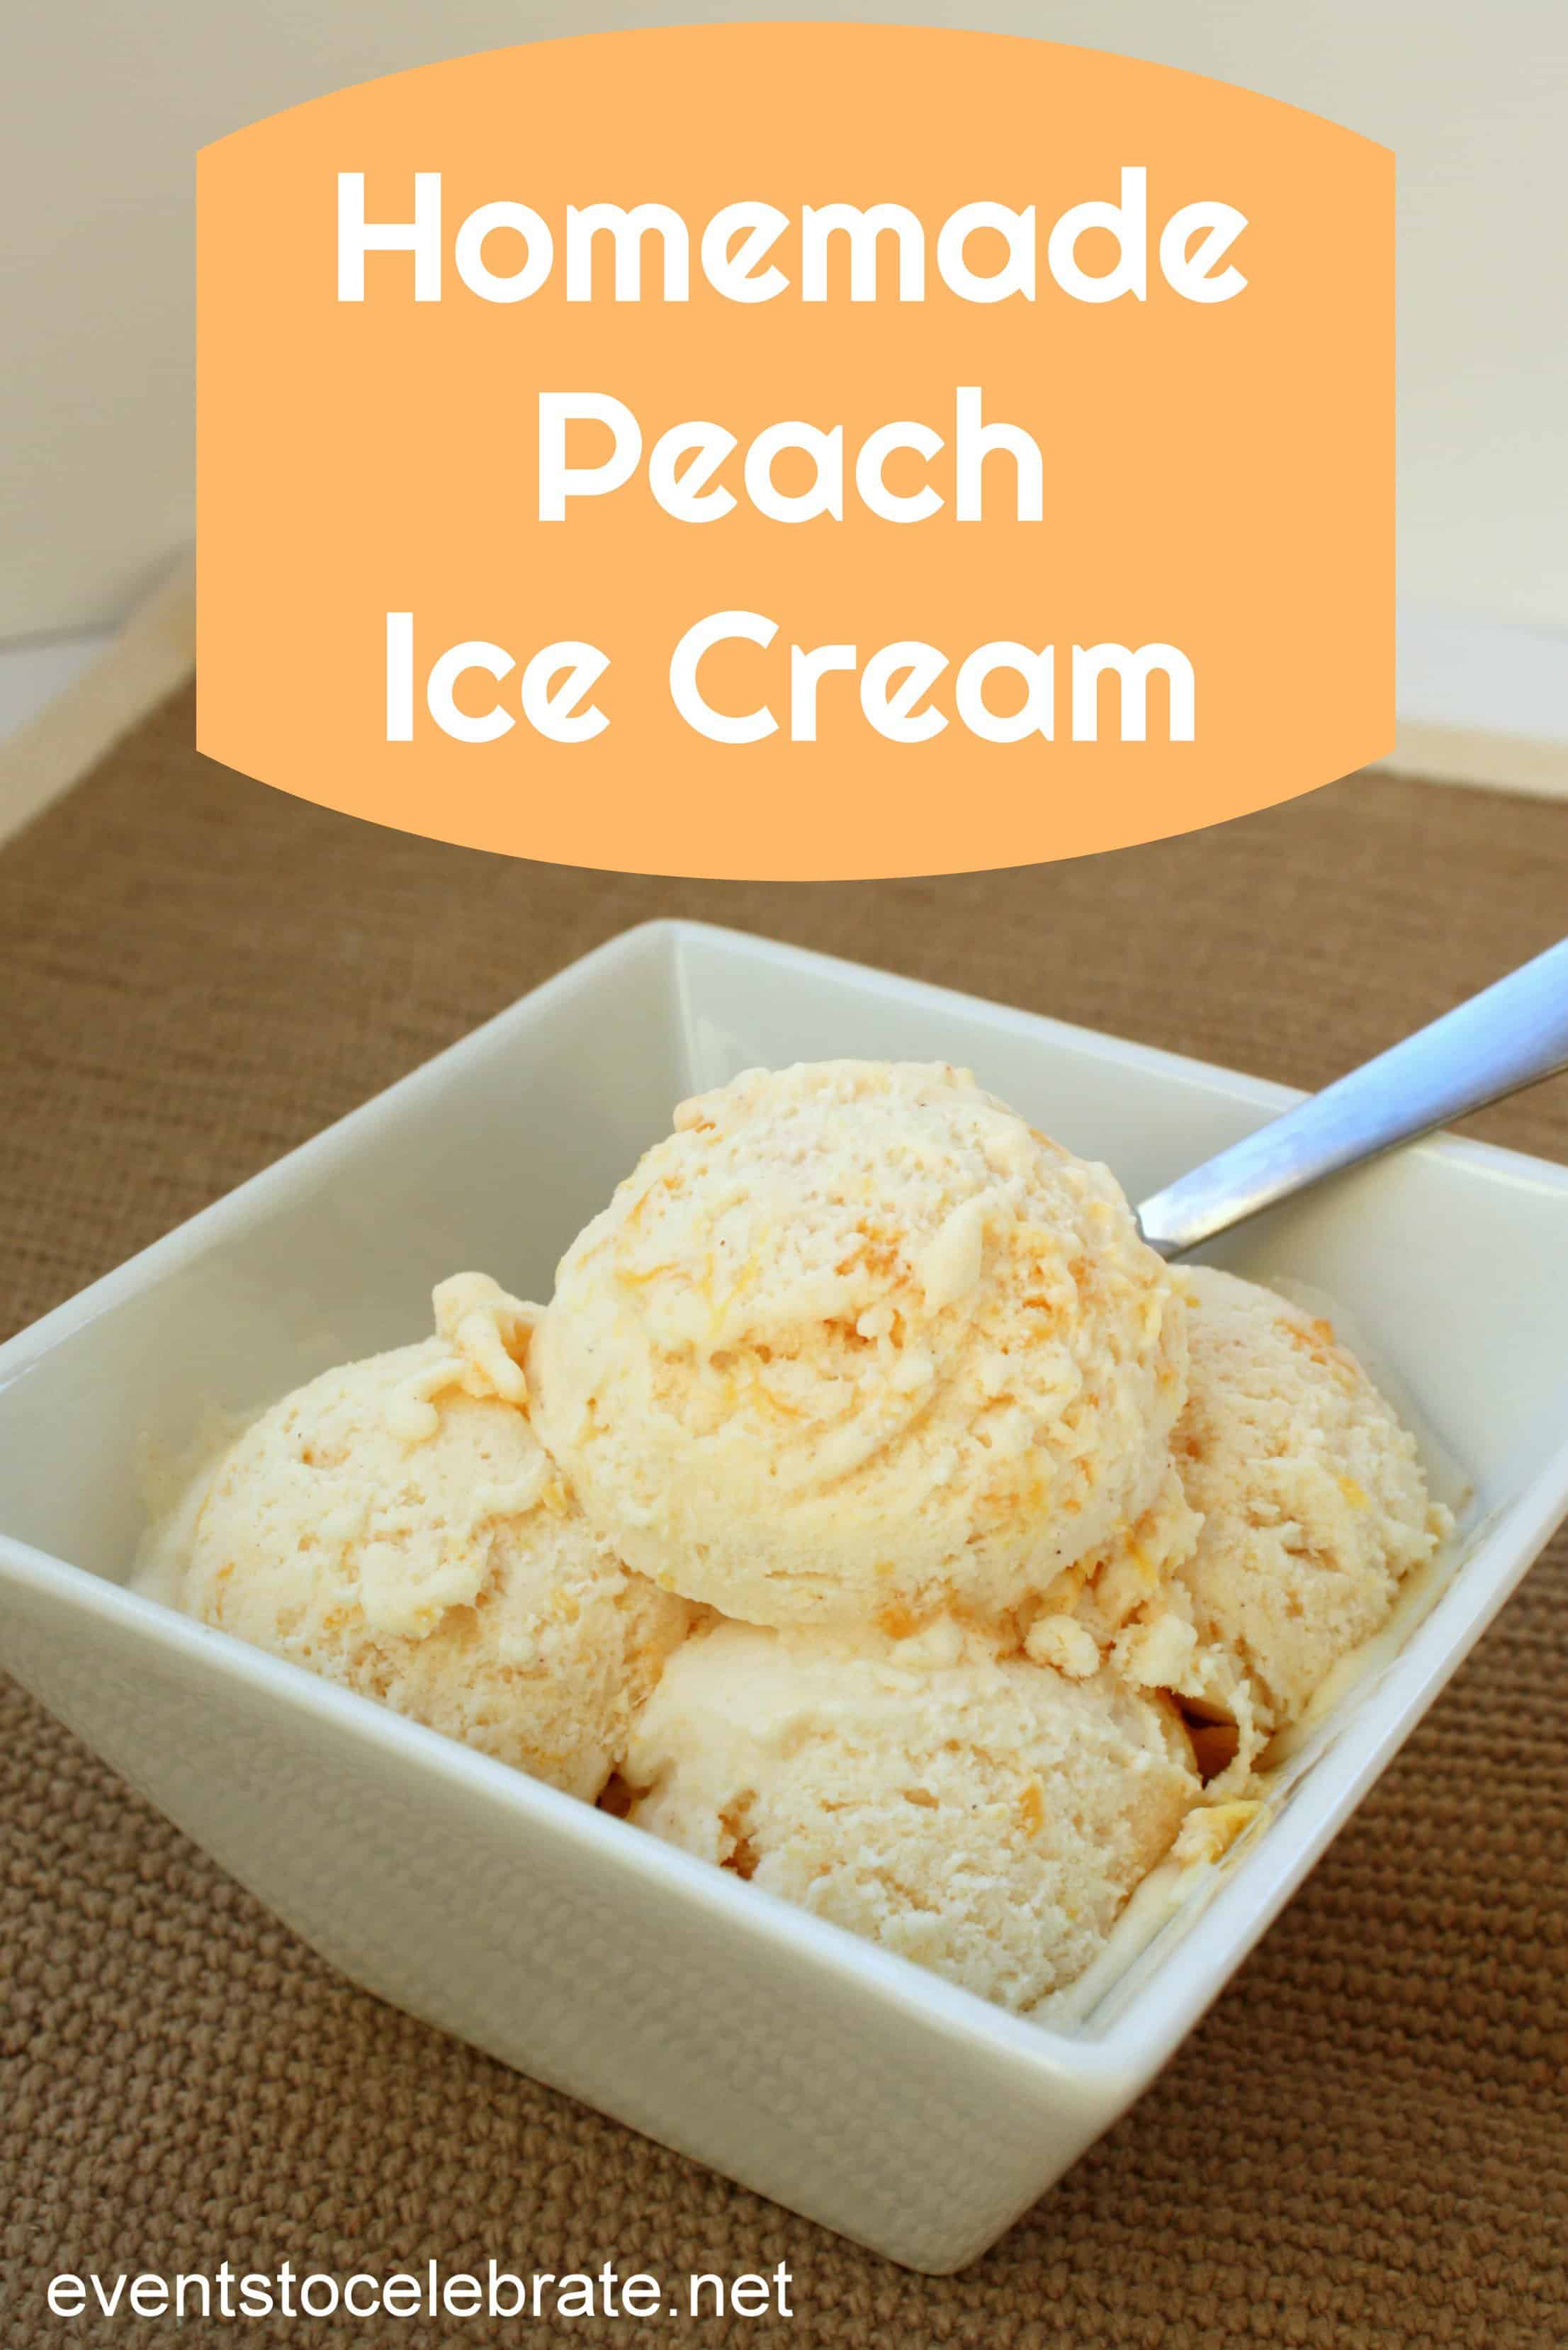 Homemade Peach Ice Cream - made simple by using a Cuisinart ice cream maker! You'll want to add this to your list of favorite homemade ice cream recipes!